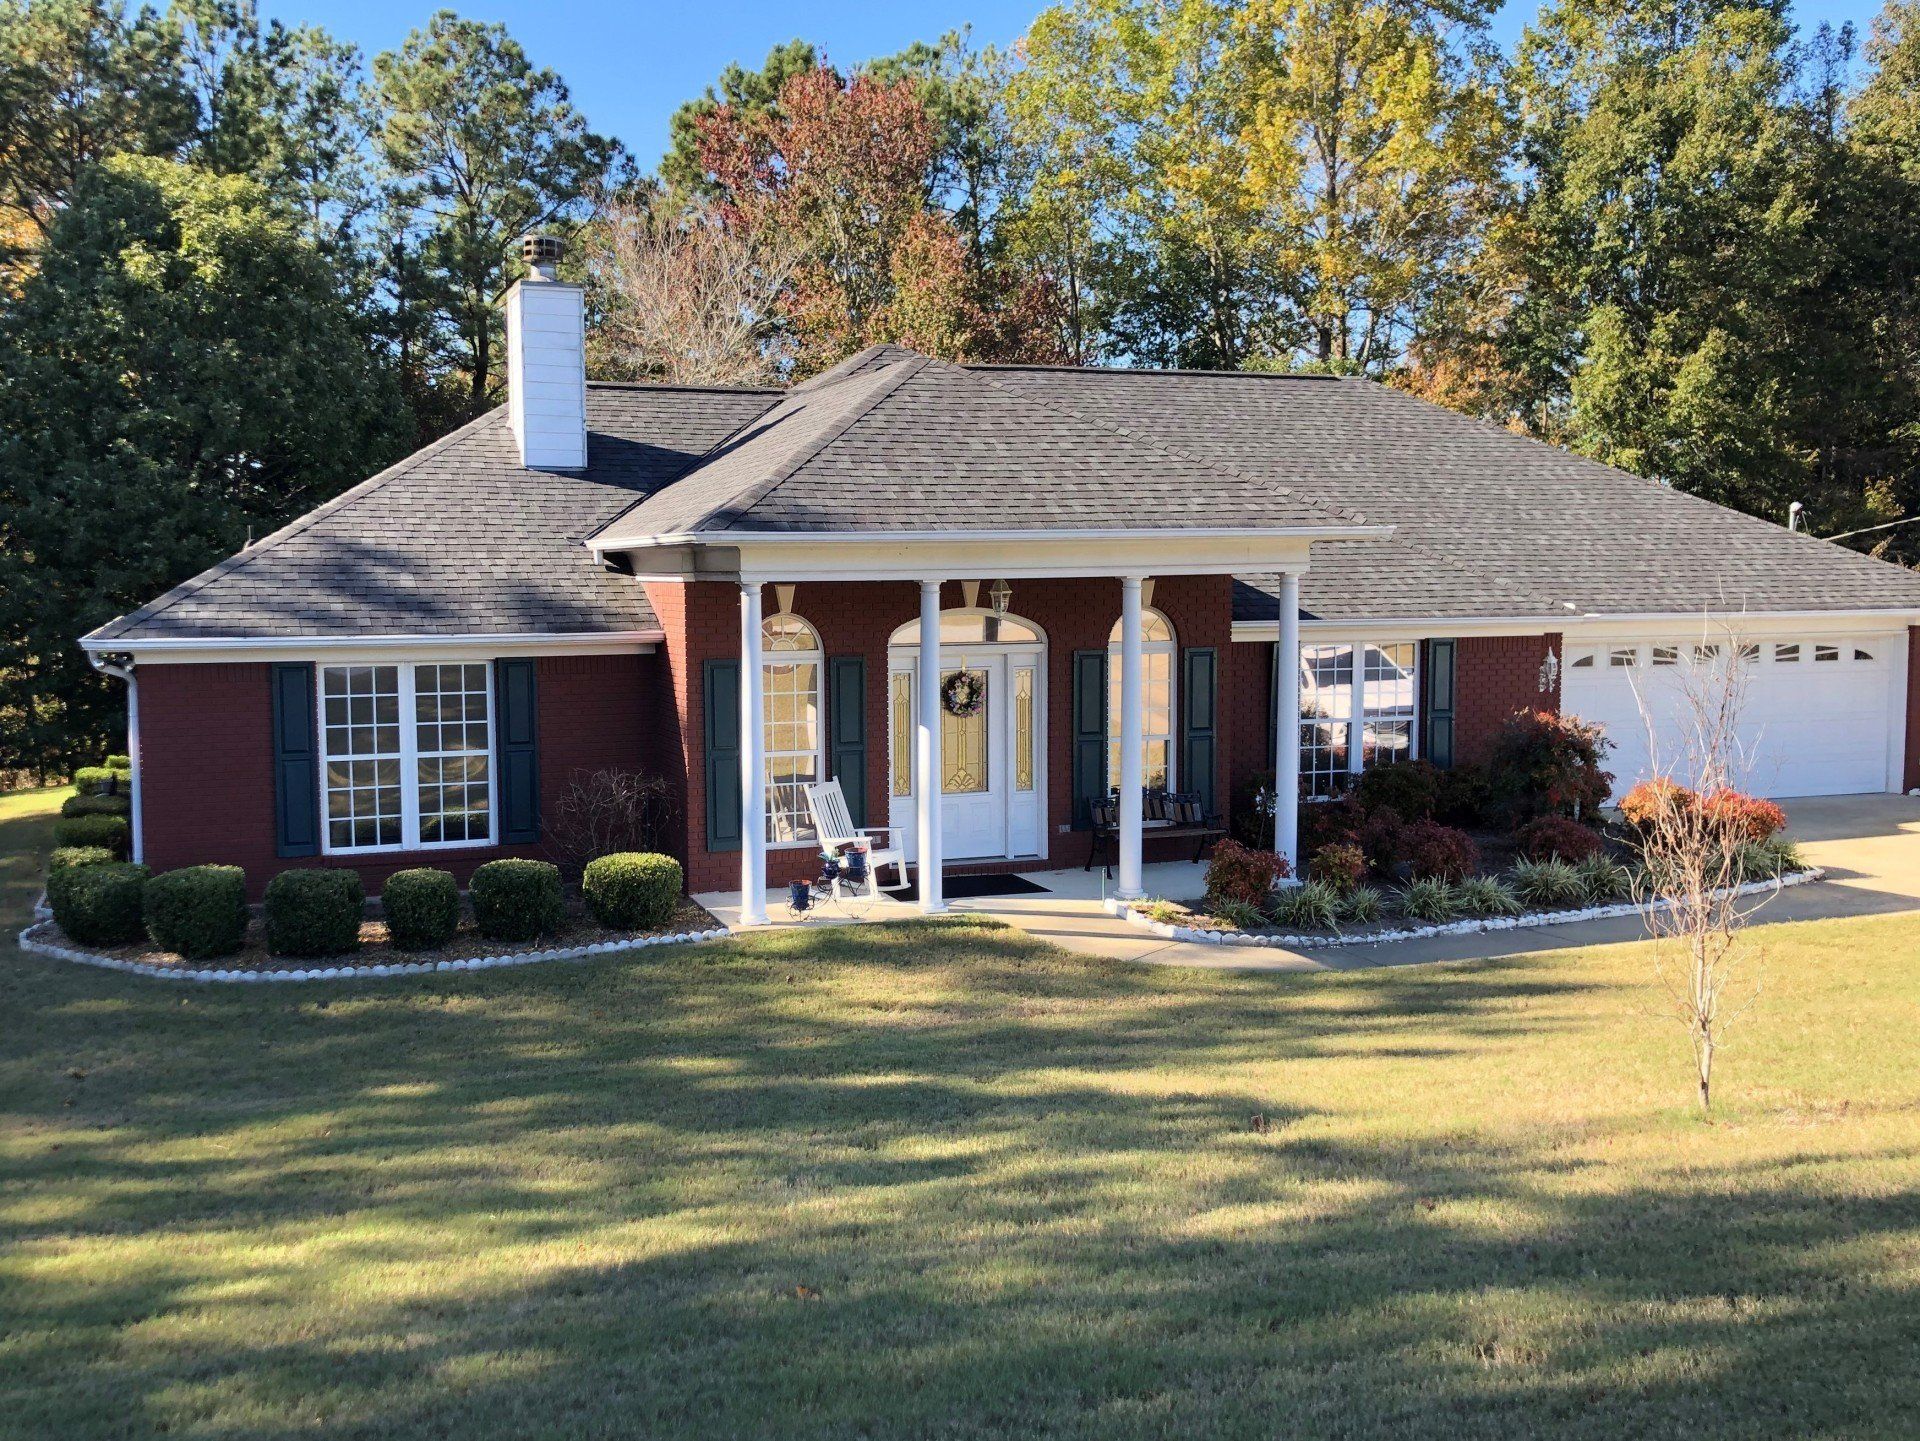 residential tint Auburn Opelika - real SPF Home Tint cut bright Sun glare leaving the ideal amount of Sunlight. Increasing clarity while looking out of home windows in Auburn AL